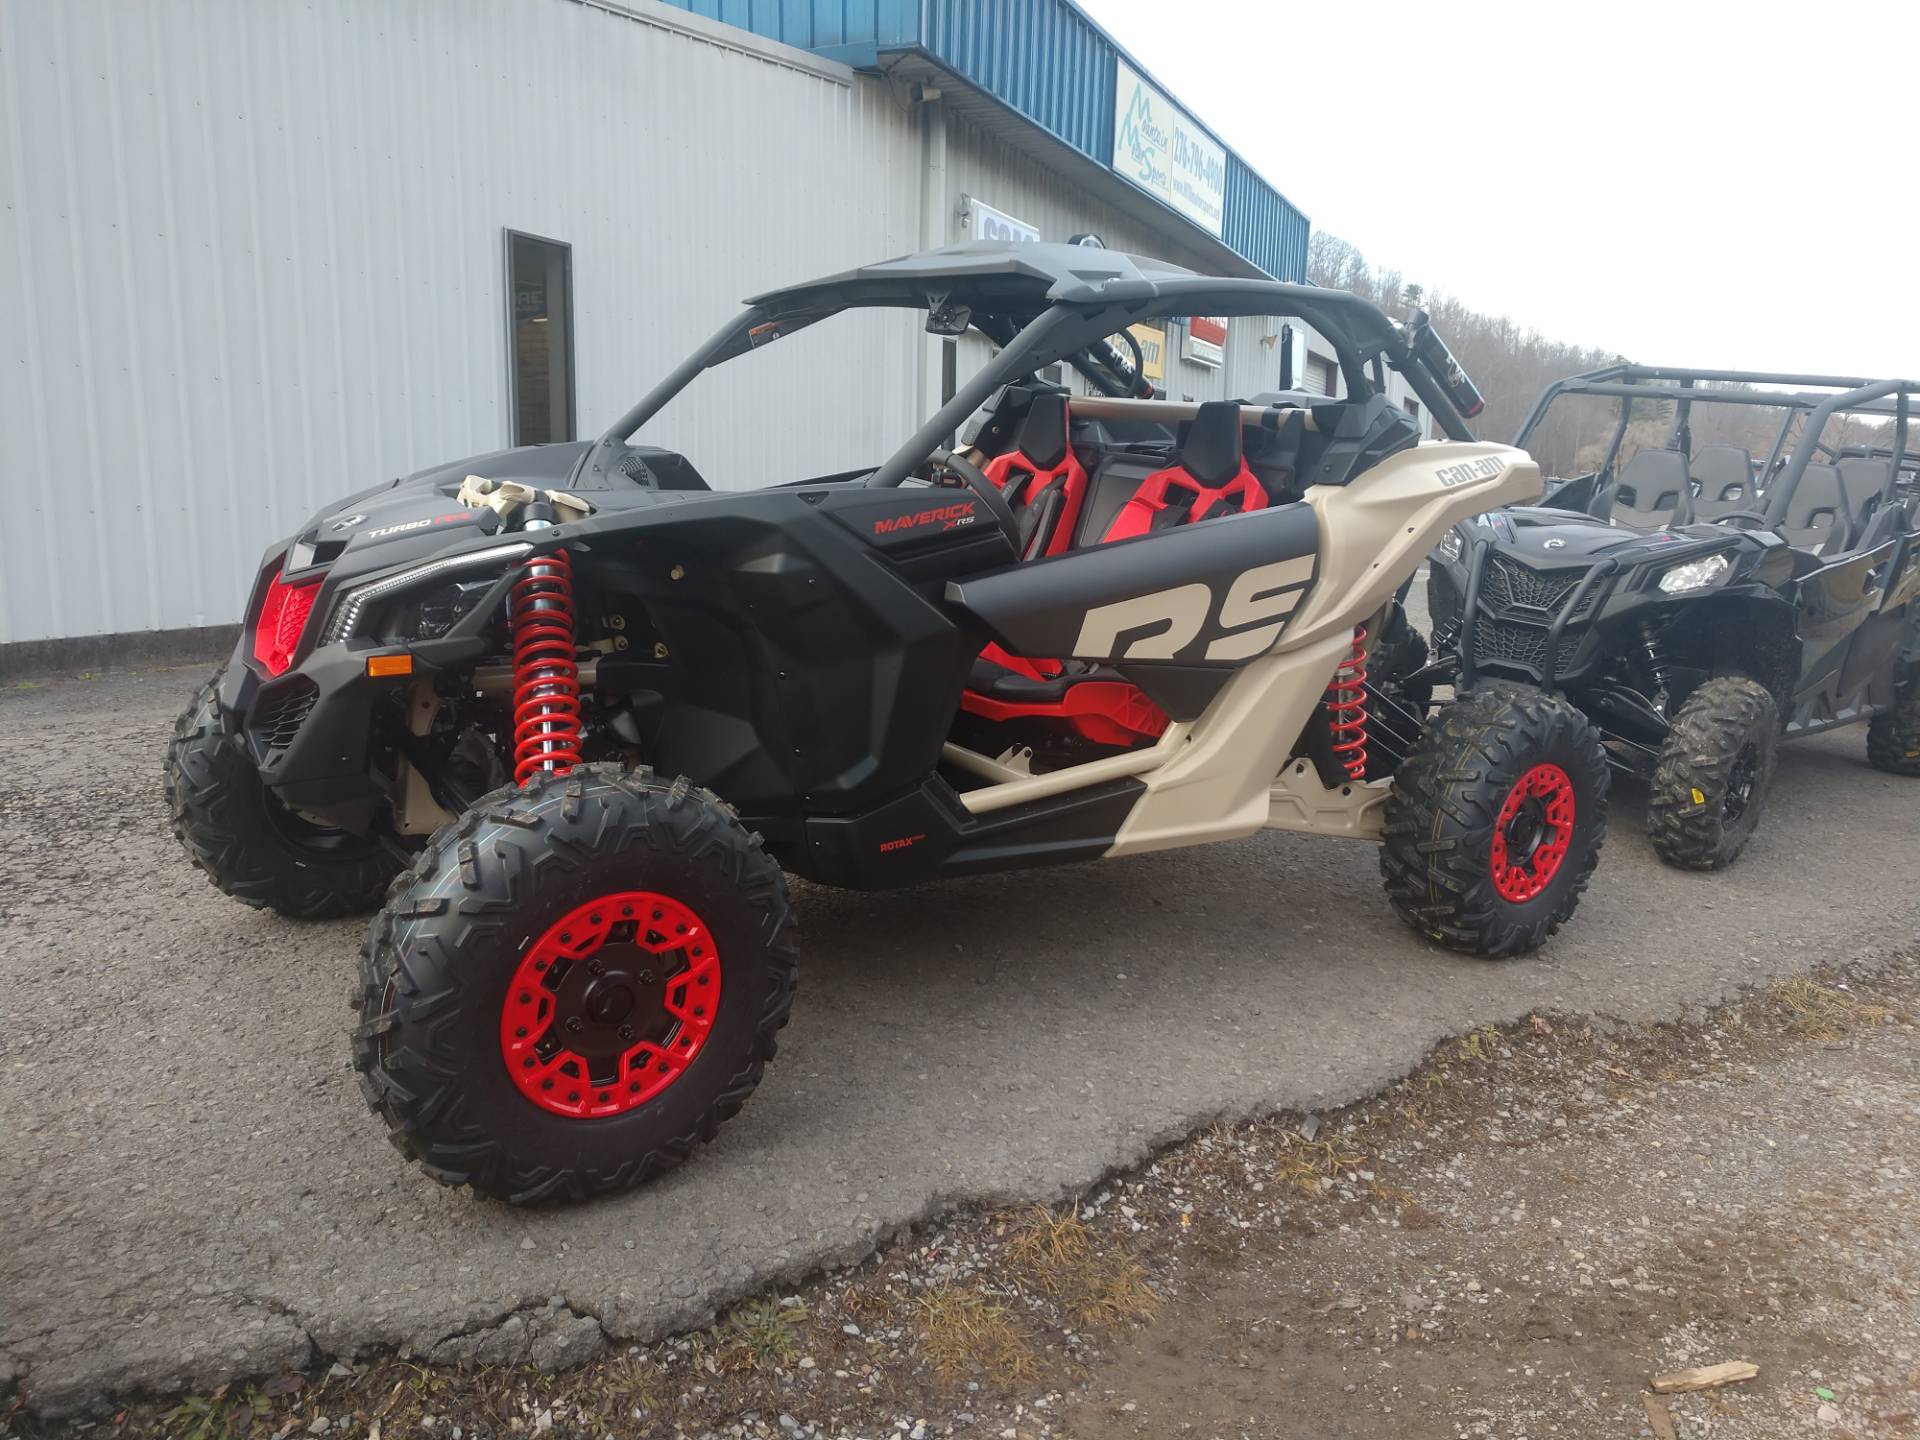 New 21 Can Am Maverick X3 X Rs Turbo Rr With Smart Shox Utility Vehicles In Pound Va N A Desert Tan Carbon Black Can Am Red